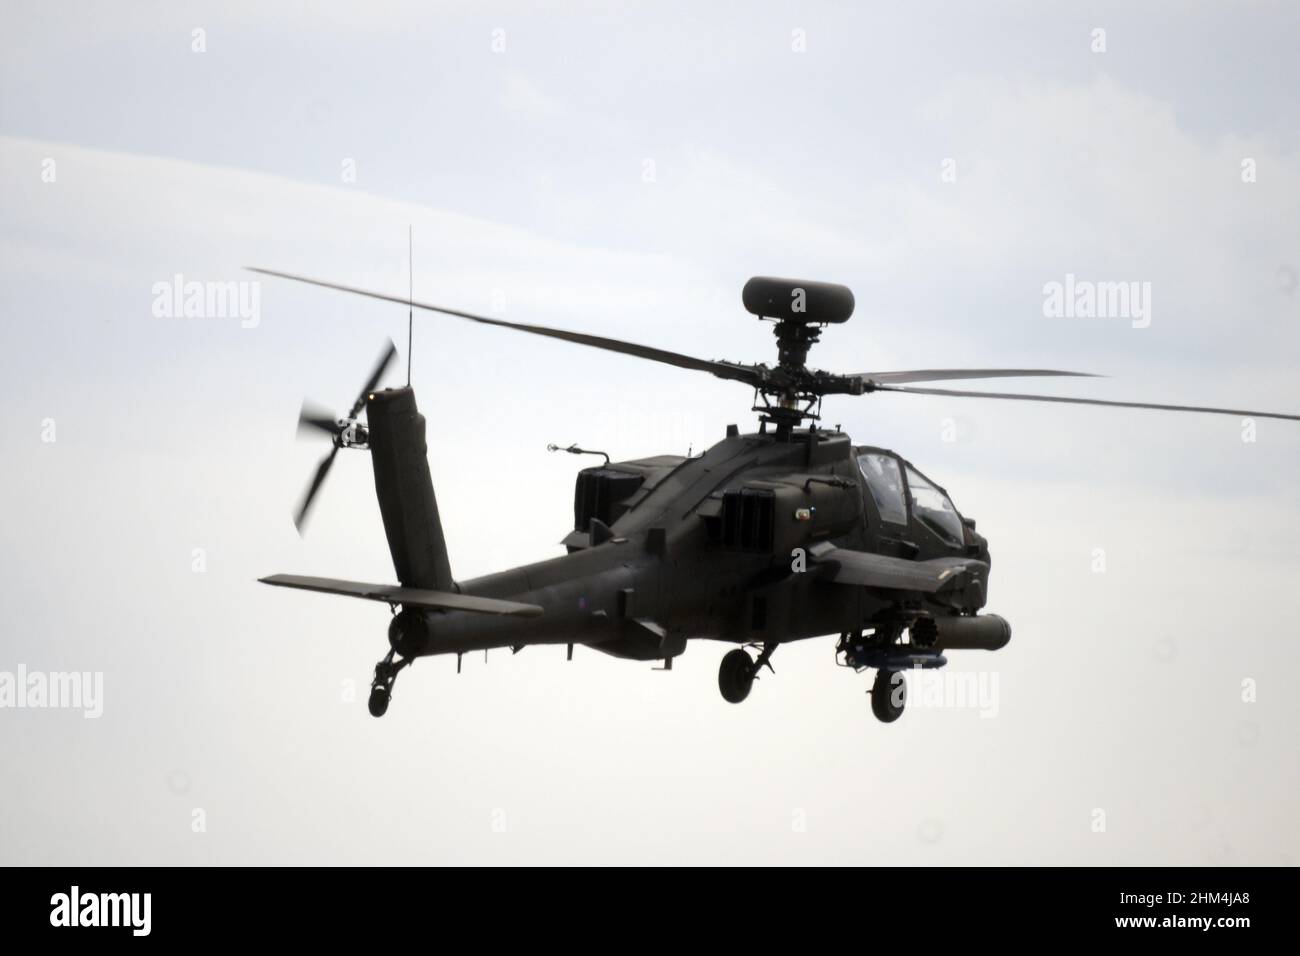 AH-64 Apache military tactical air support helicopter Stock Photo